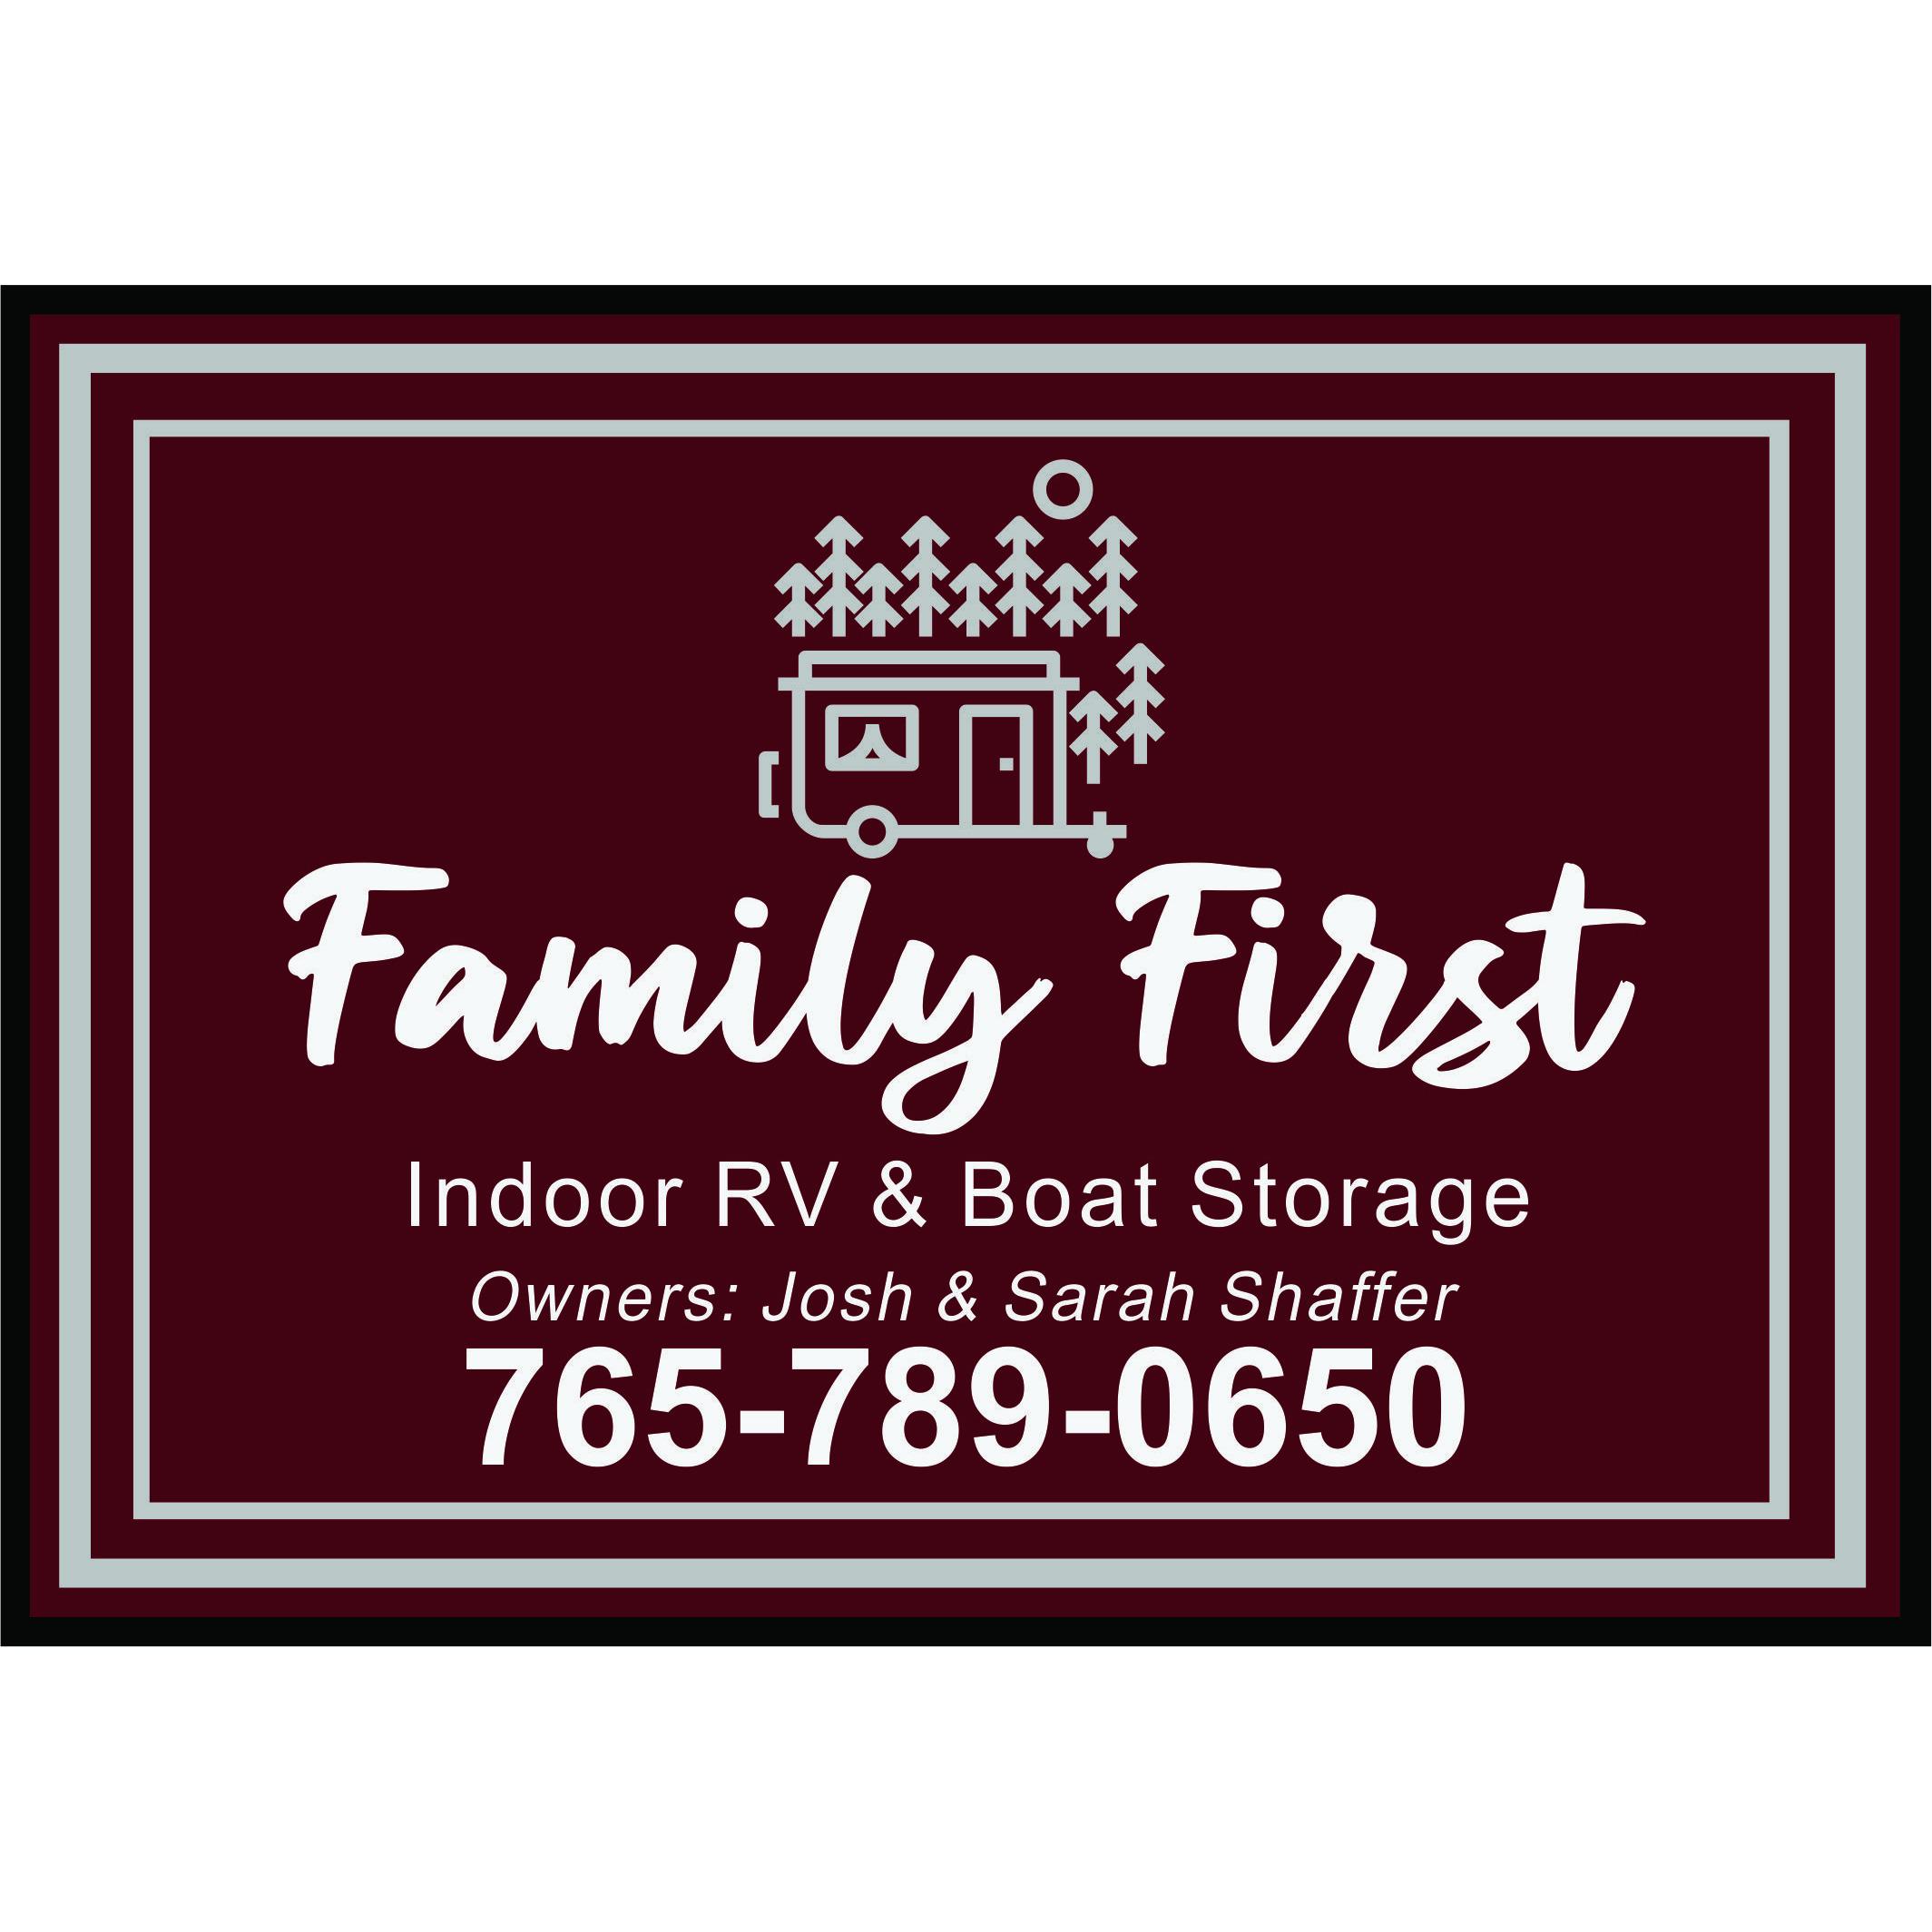 Family First Indoor RV & Boat Storage